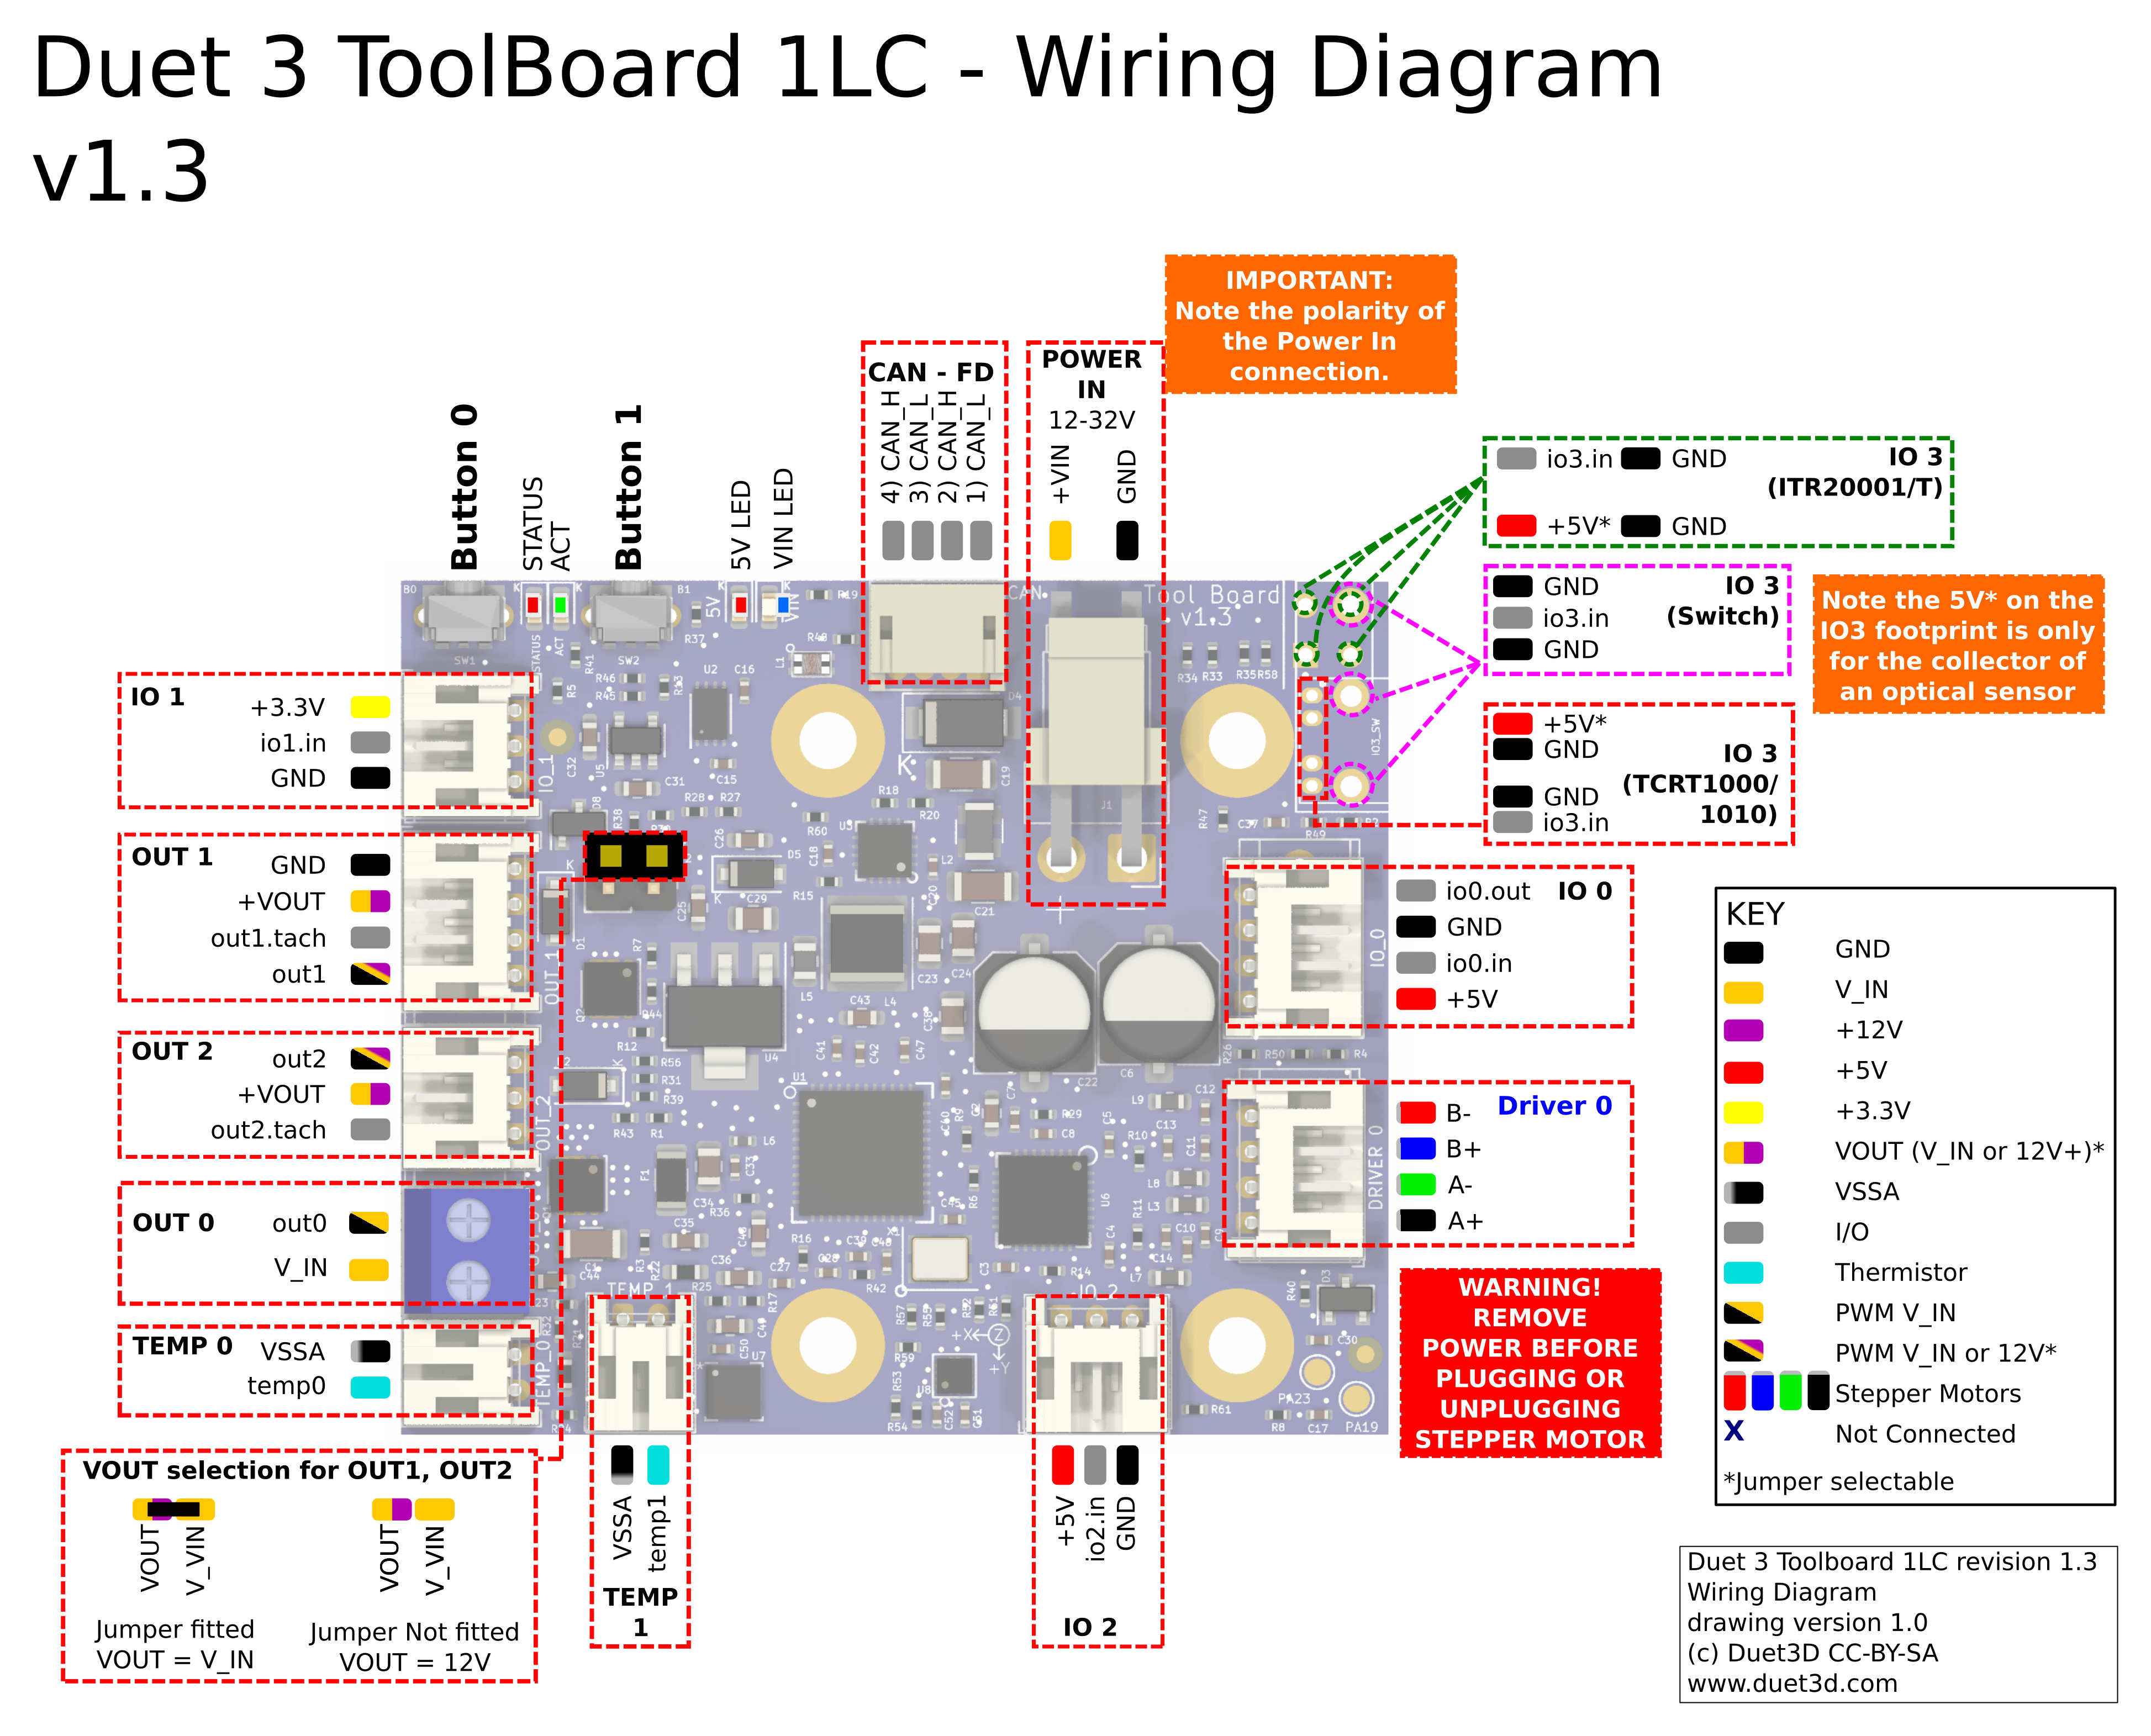 diagram showing the pinout for each of the headers on the Duet 3 toolboard 1LC v1.3